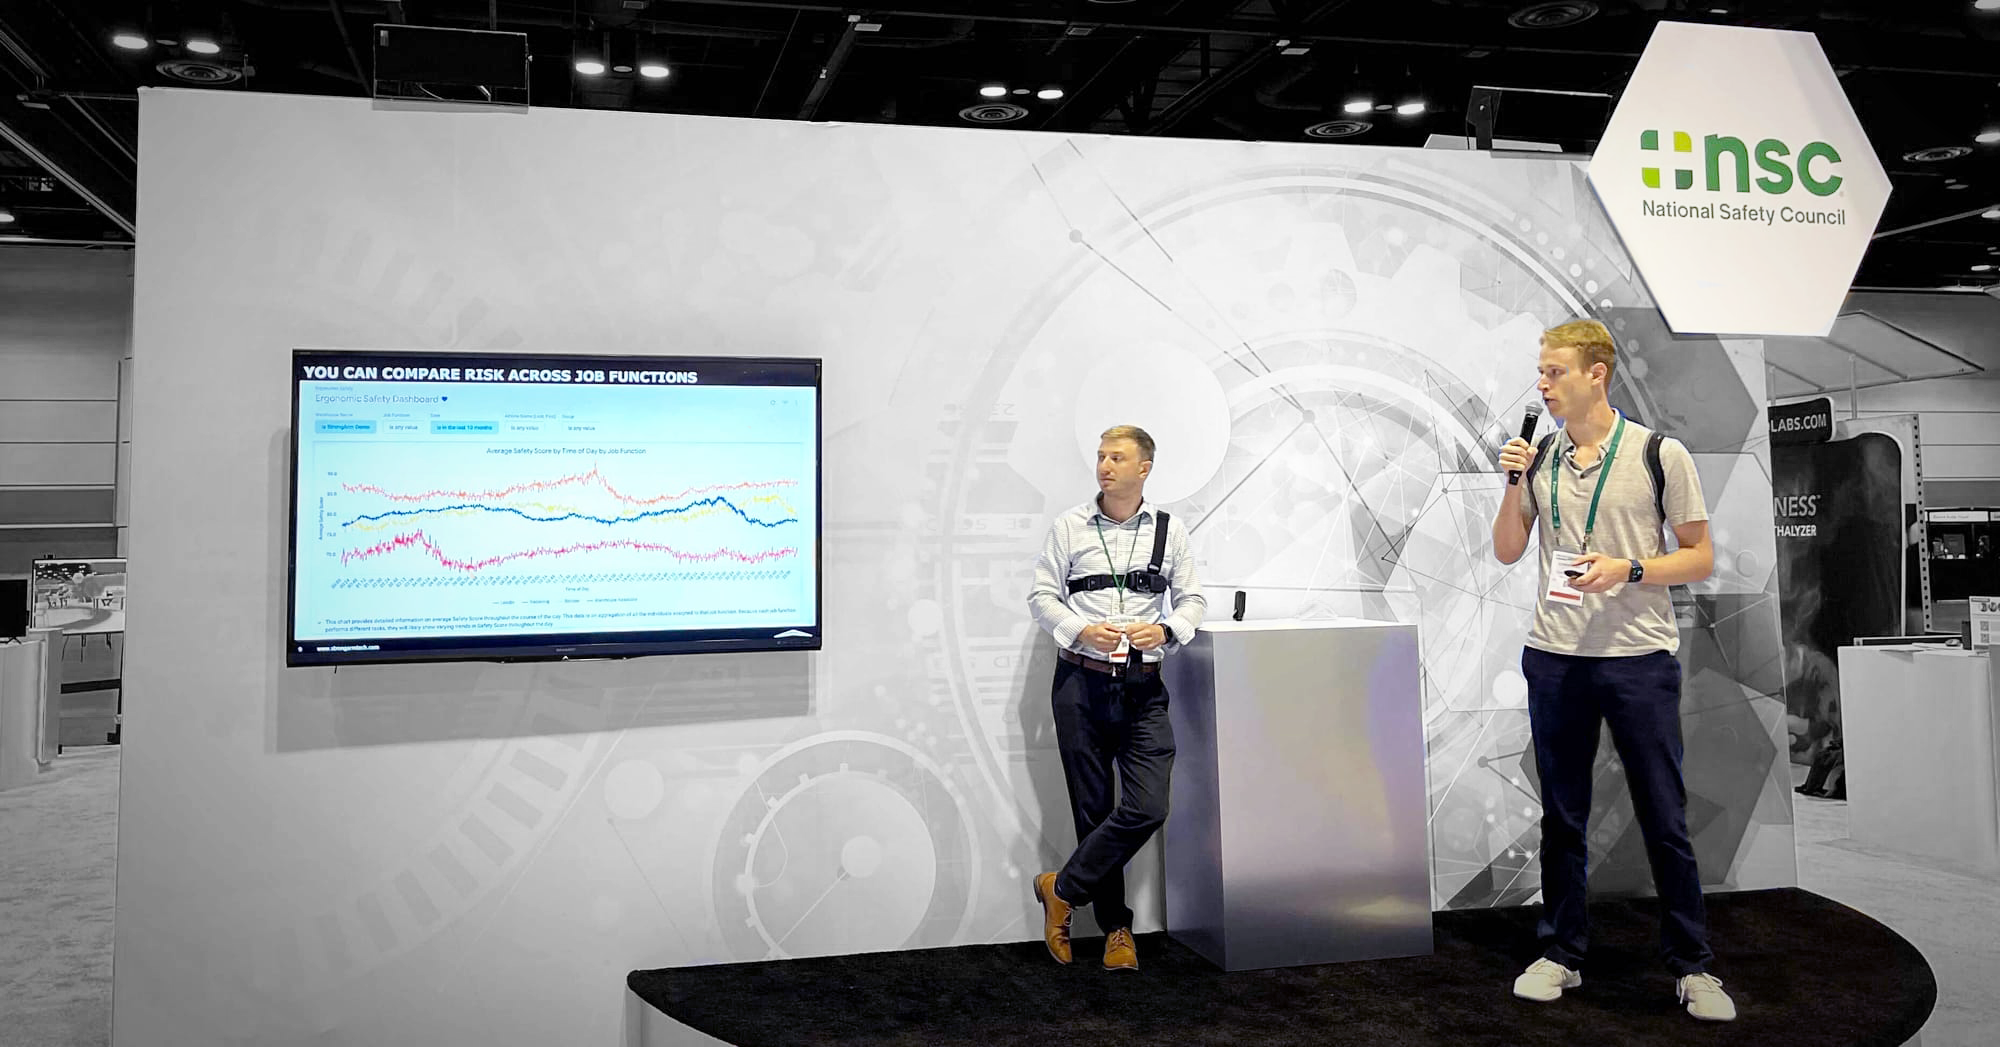 Two men standing on a small stage presenting a presentation. Both men are looking at a television with the presentation which shows a chart and says, "You Can Compare Risk Across Job Functions"